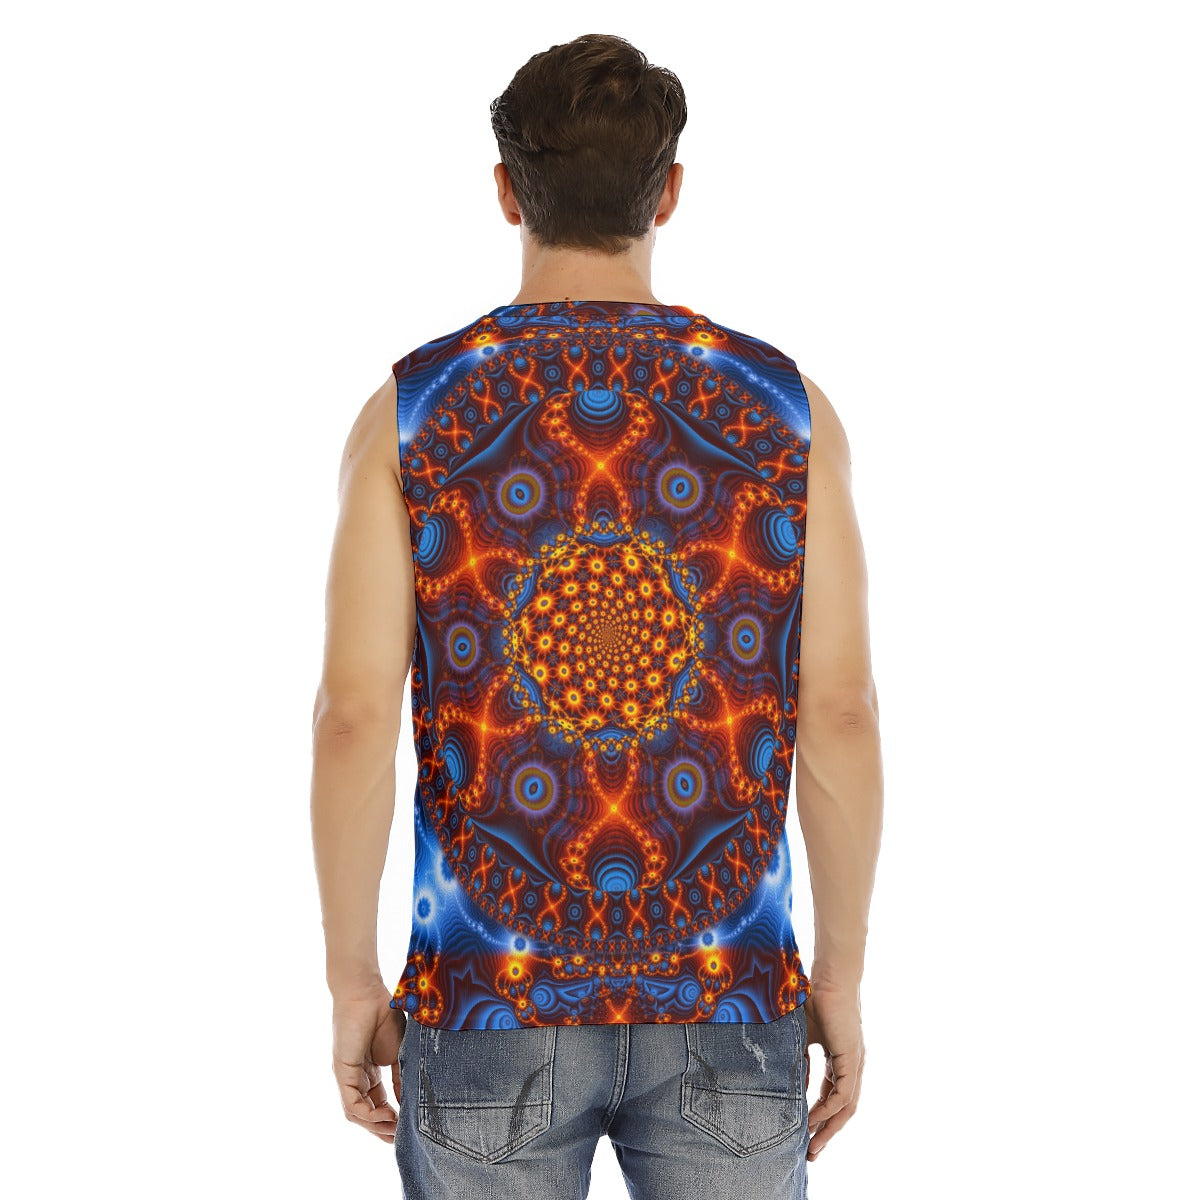 Psychedelic Men's Rave Outfit